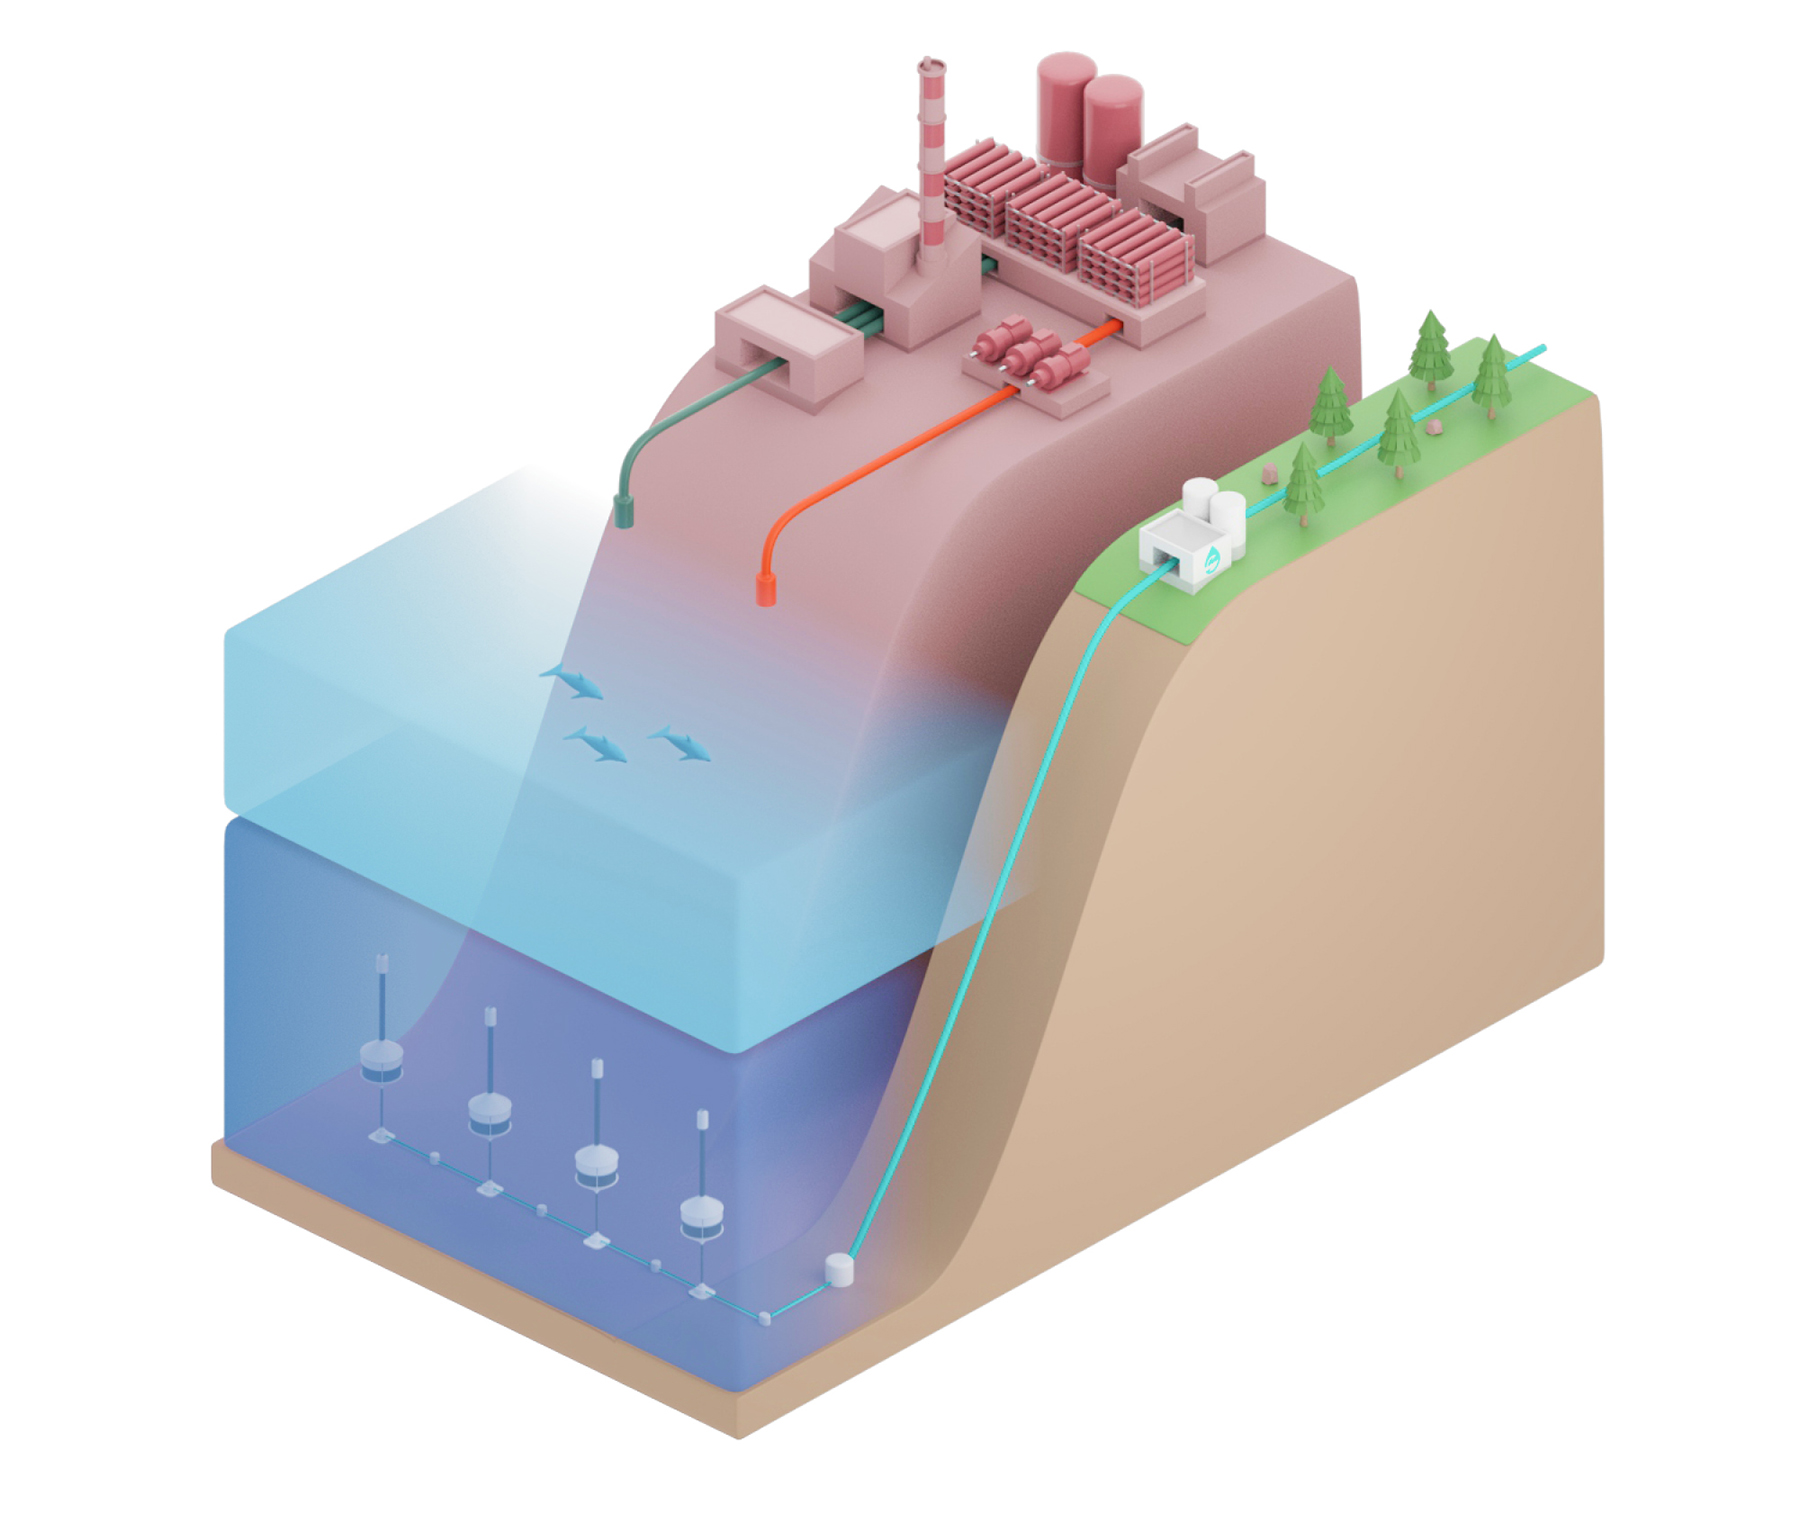 This rendering of an OceanWell “water farm” and its onshore control station highlights the system’s smaller land requirements as compared with a traditional onshore desalination facility. (Image courtesy of OceanWell)